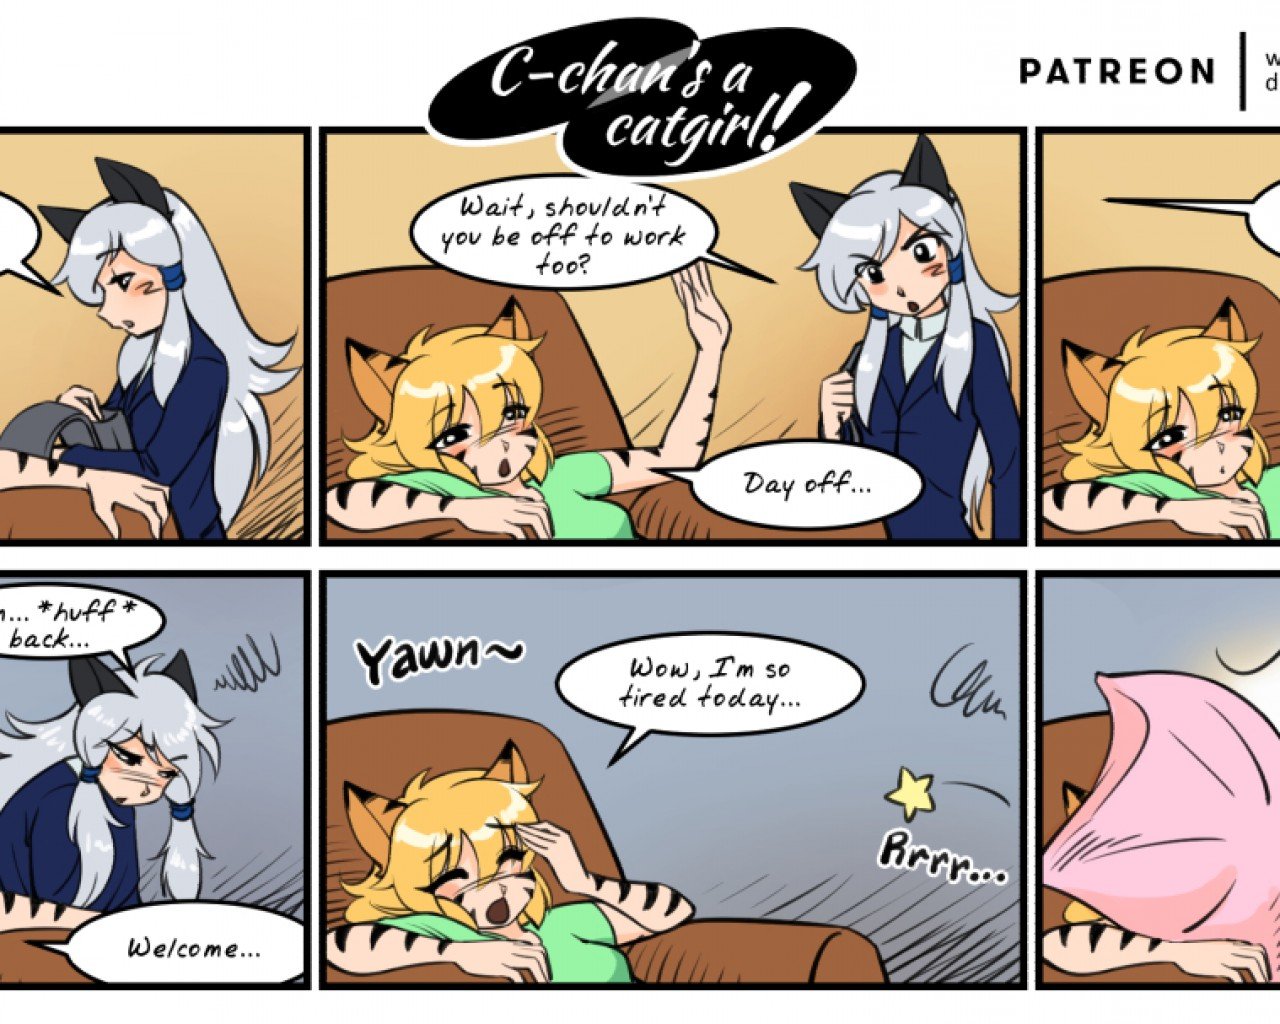 Preview Image 1 for C-chan's a Catgirl!